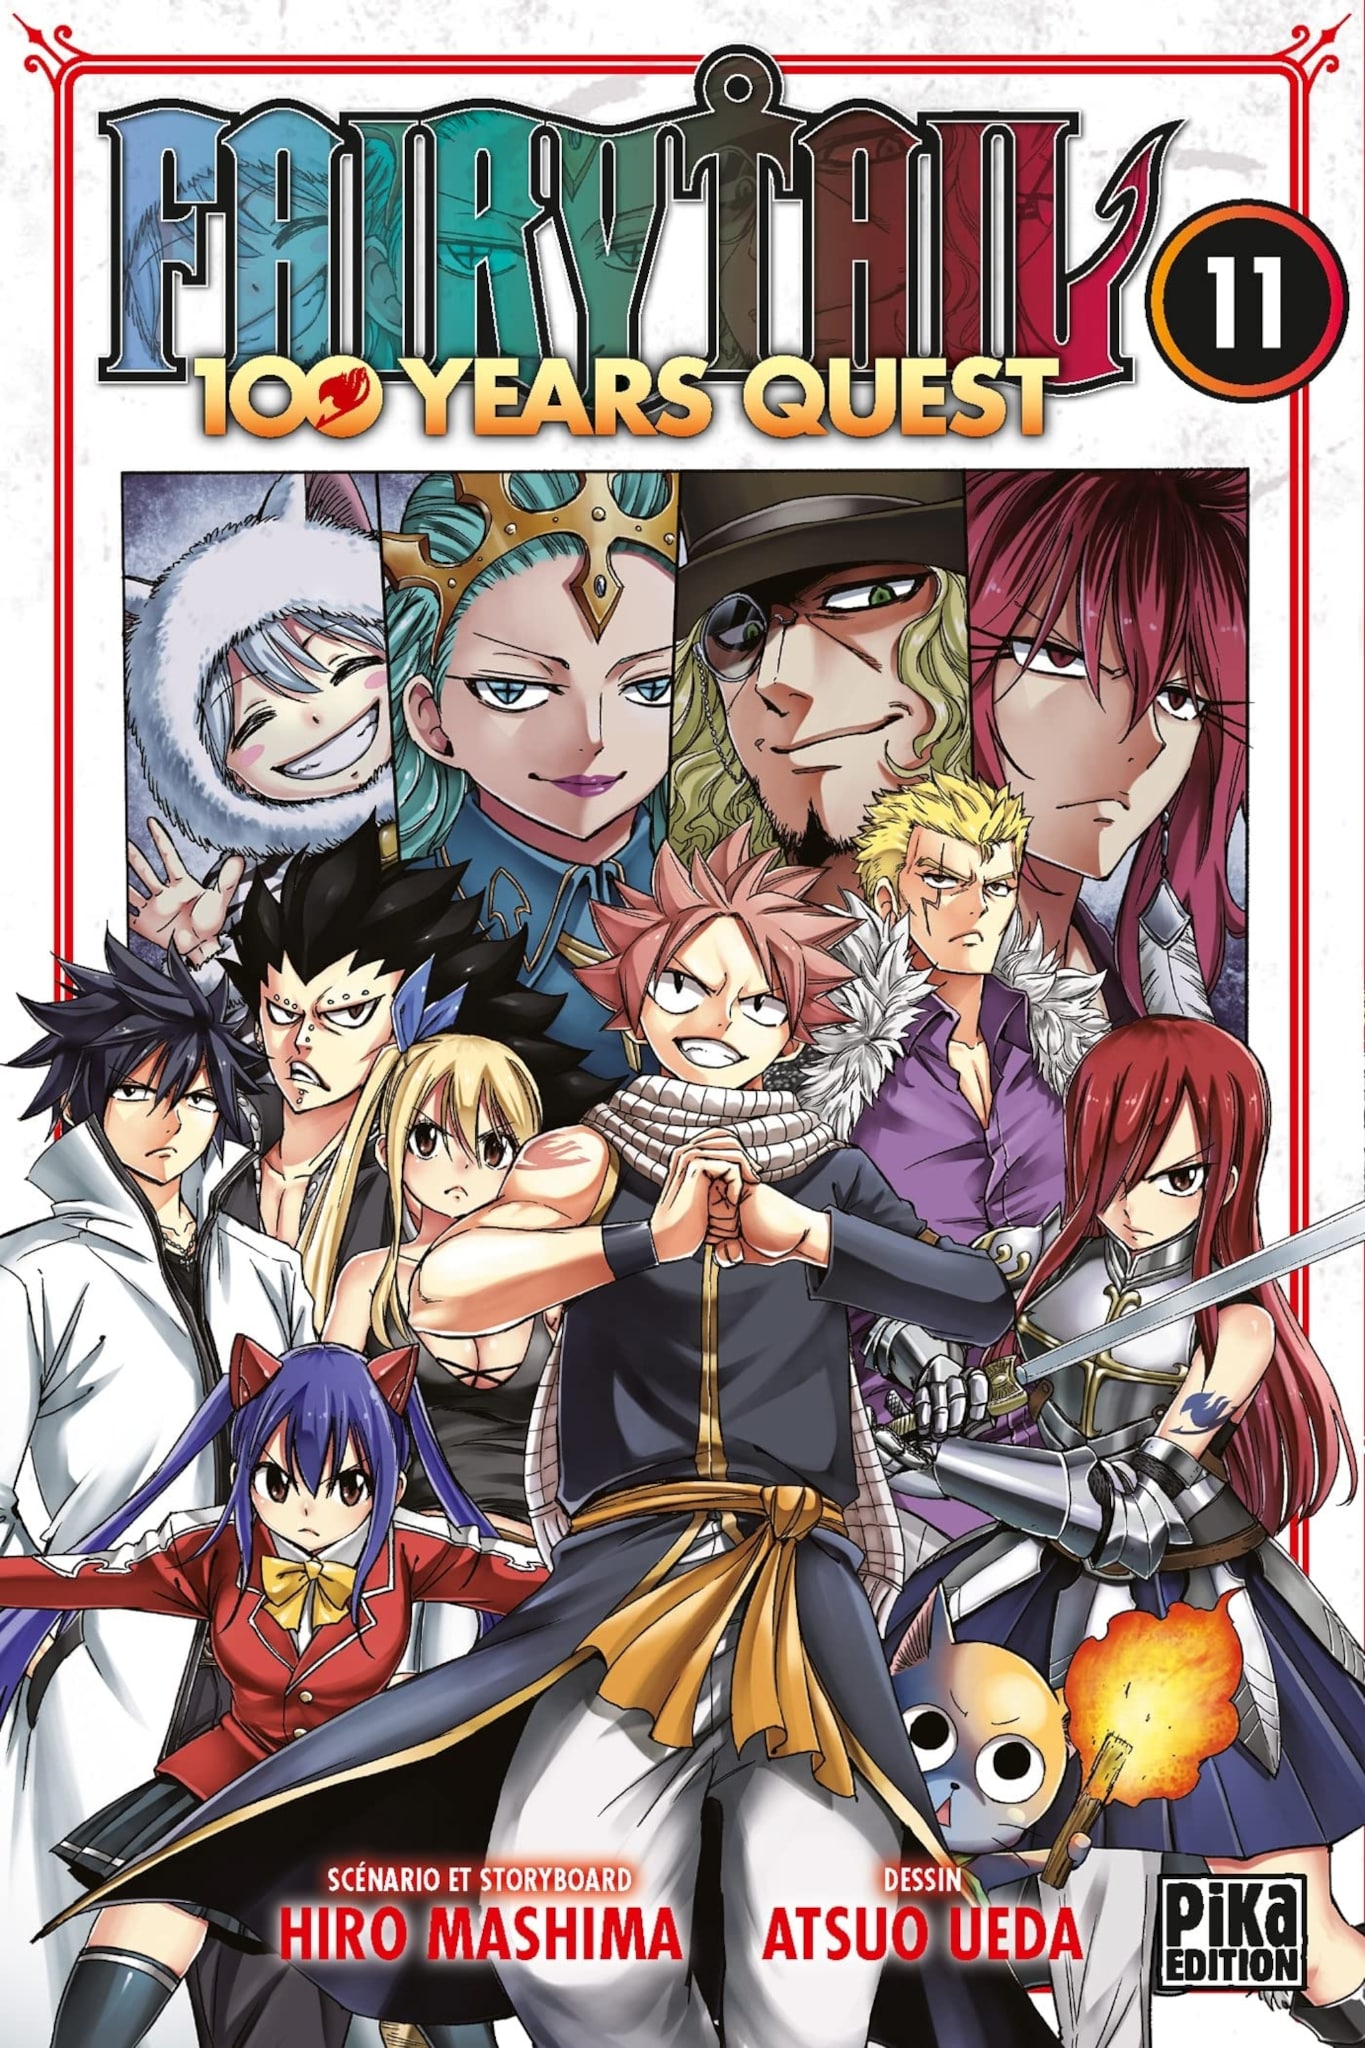 Tome 11 du manga Fairy Tail : 100 Years Quest